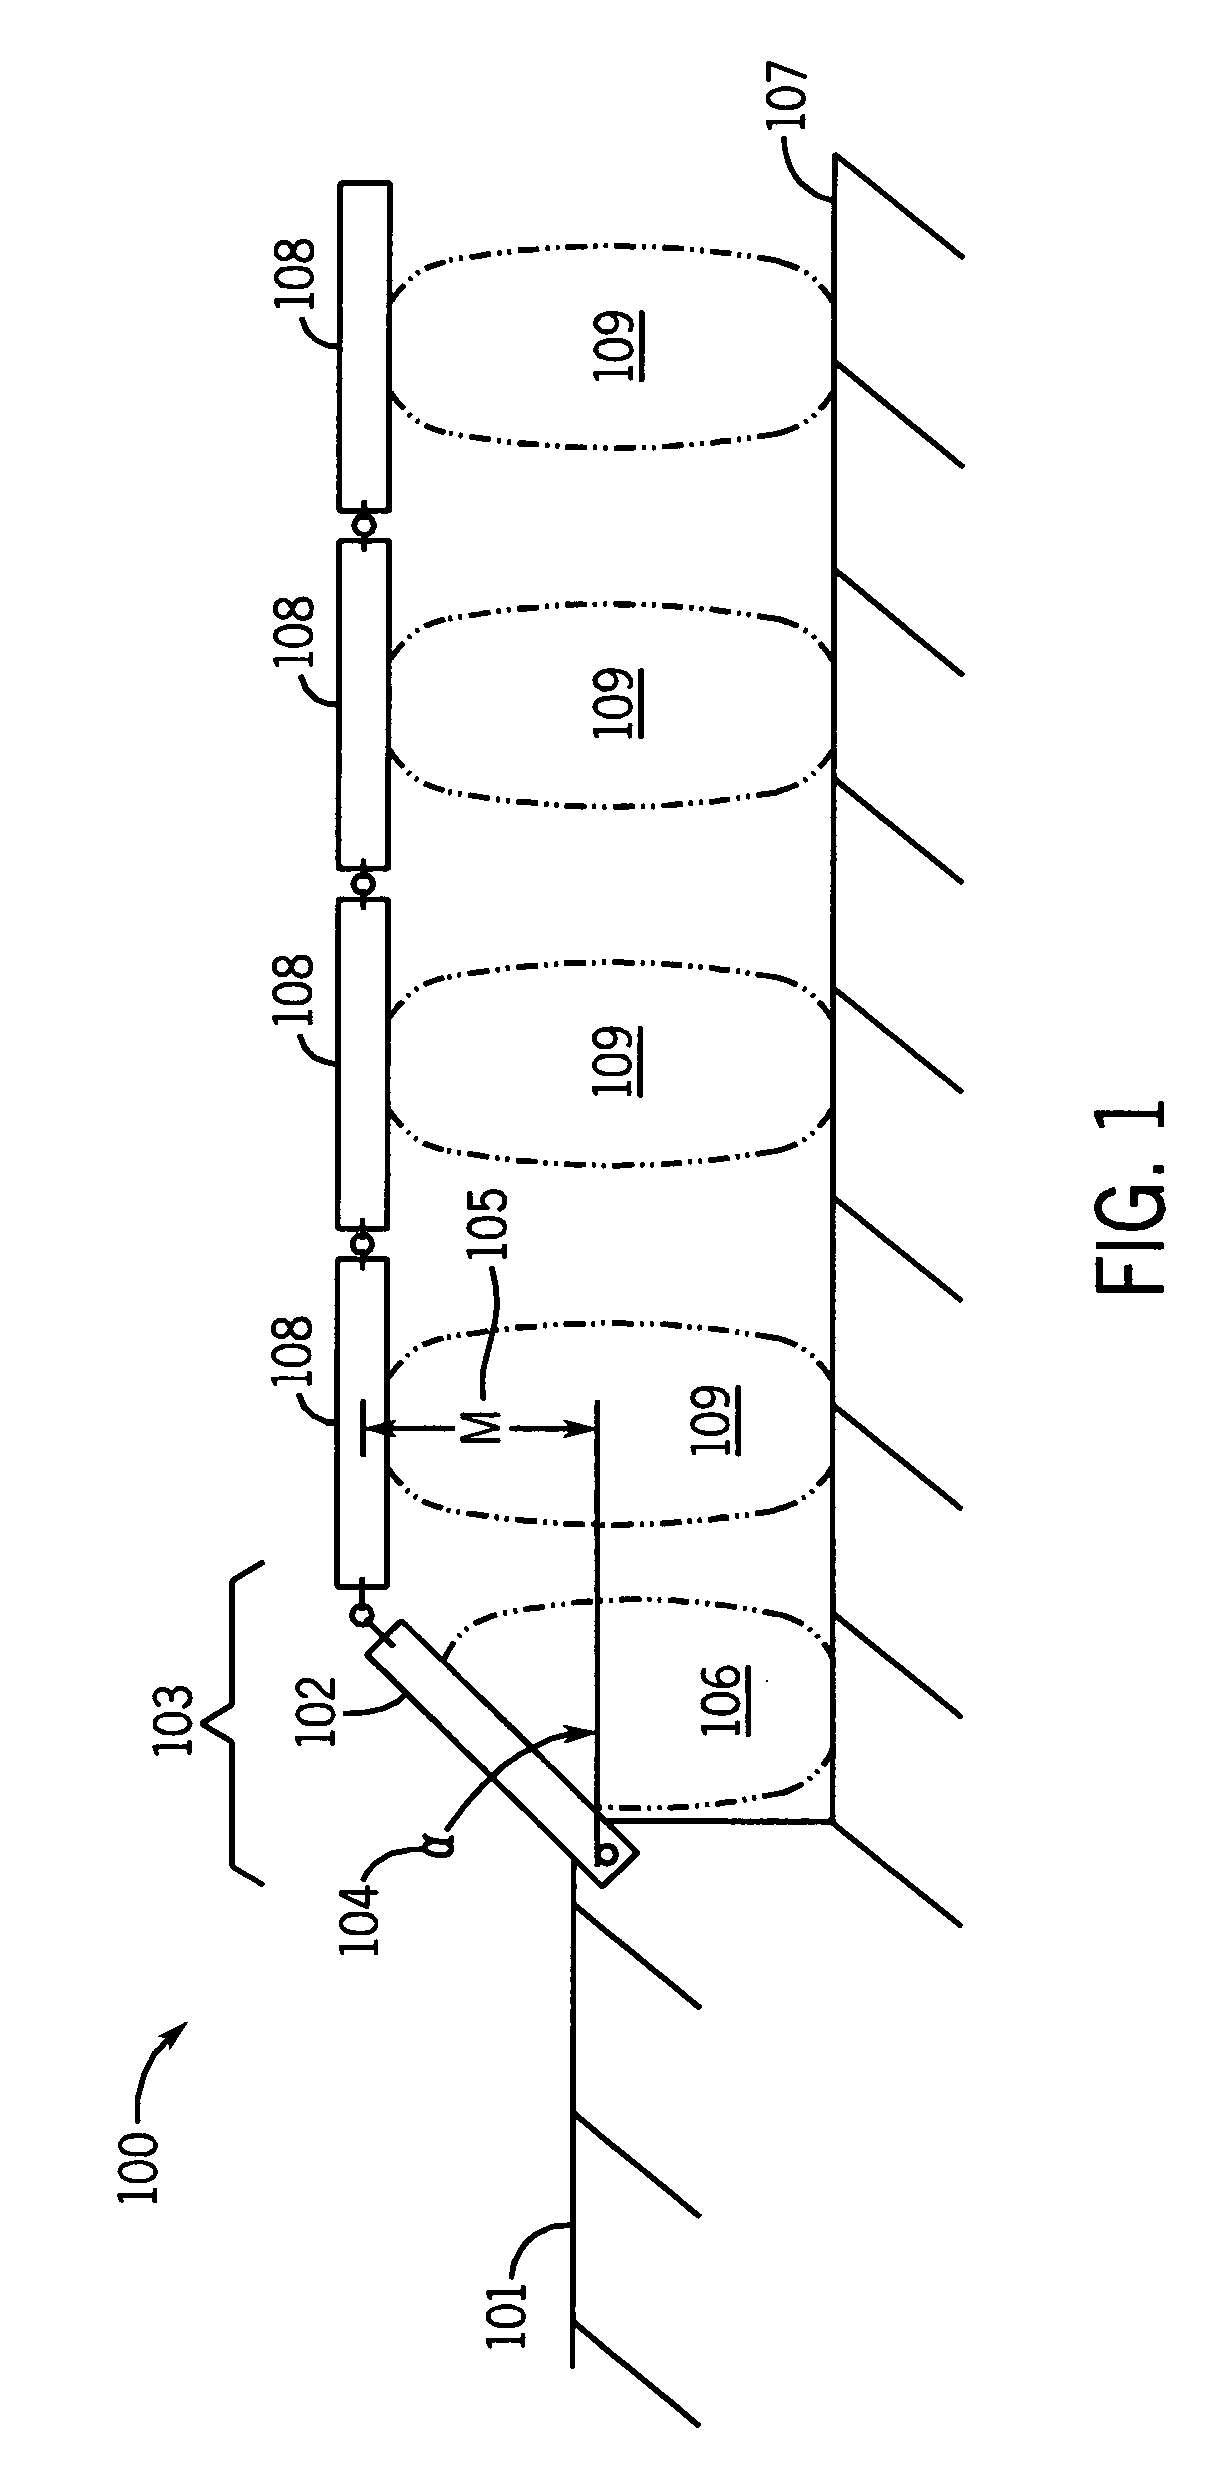 Roadway for decelerating and/or accelerating a vehicle including an aircraft